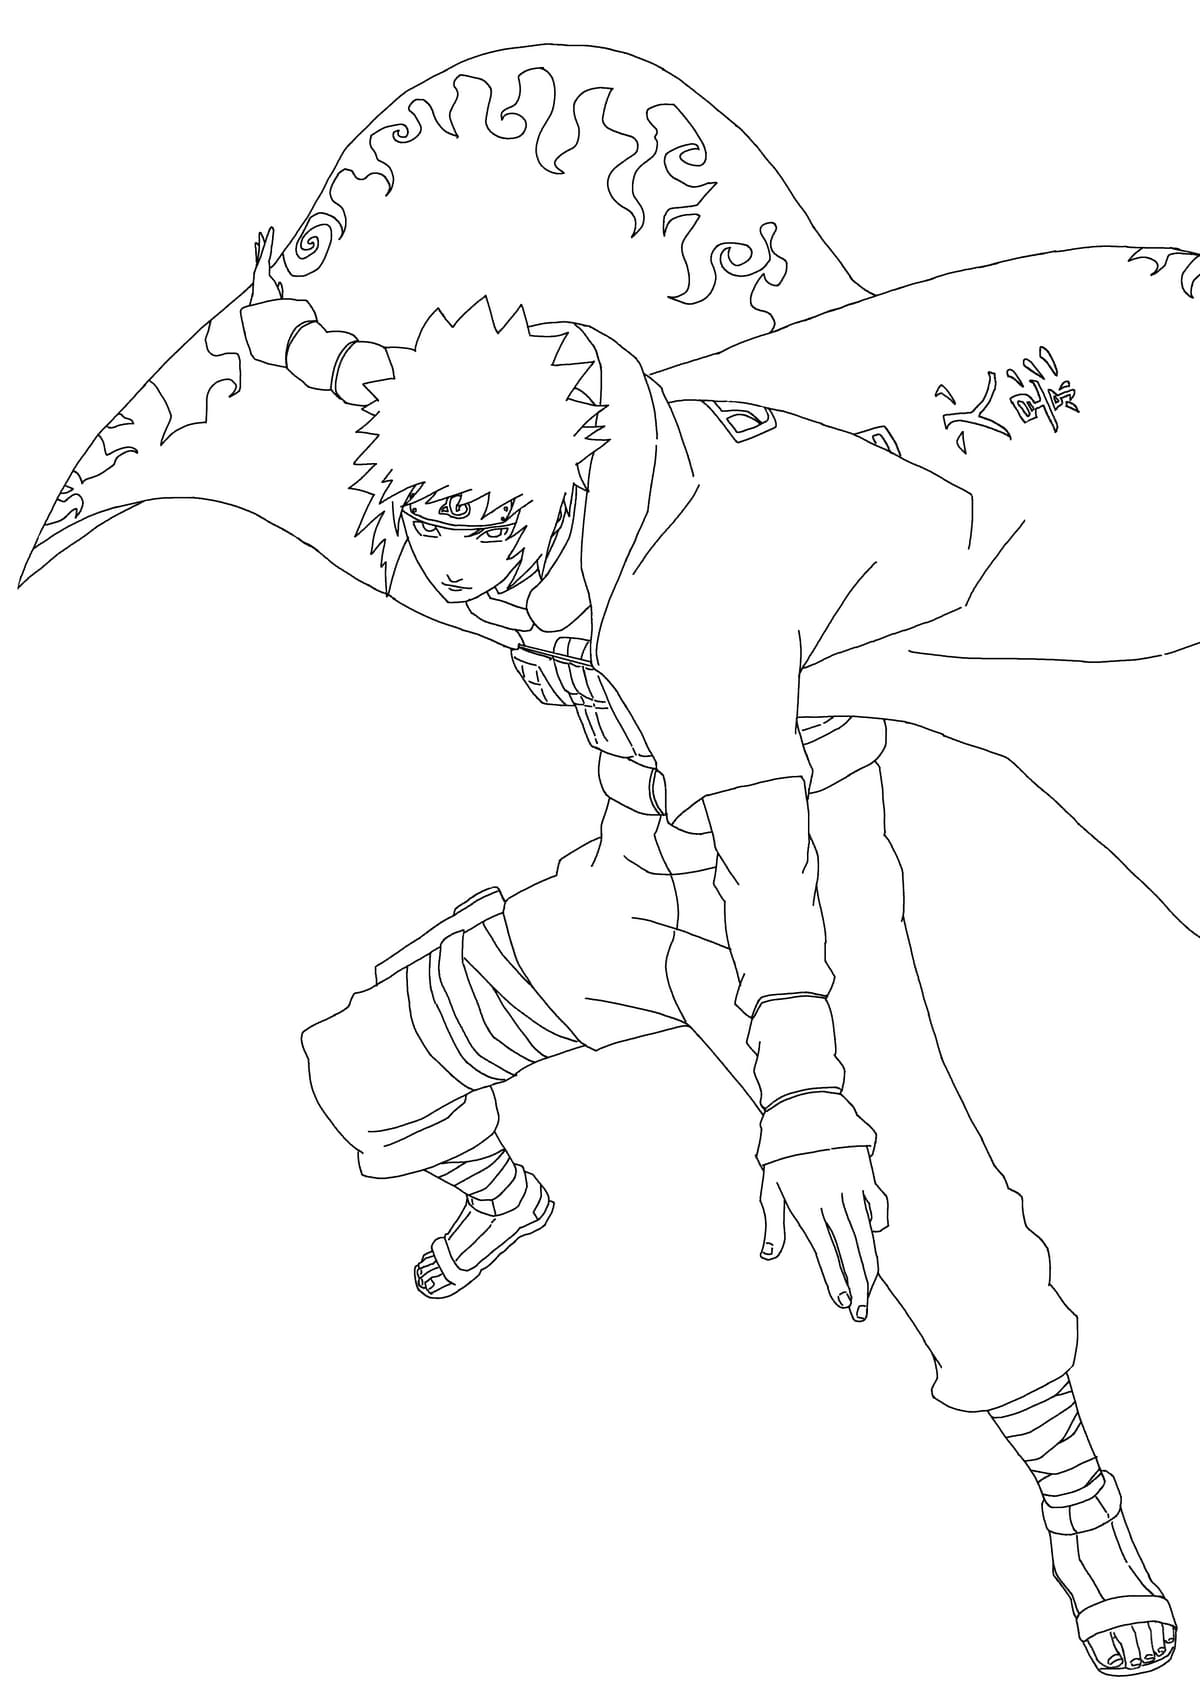 Coloring page Minato Fighting pose